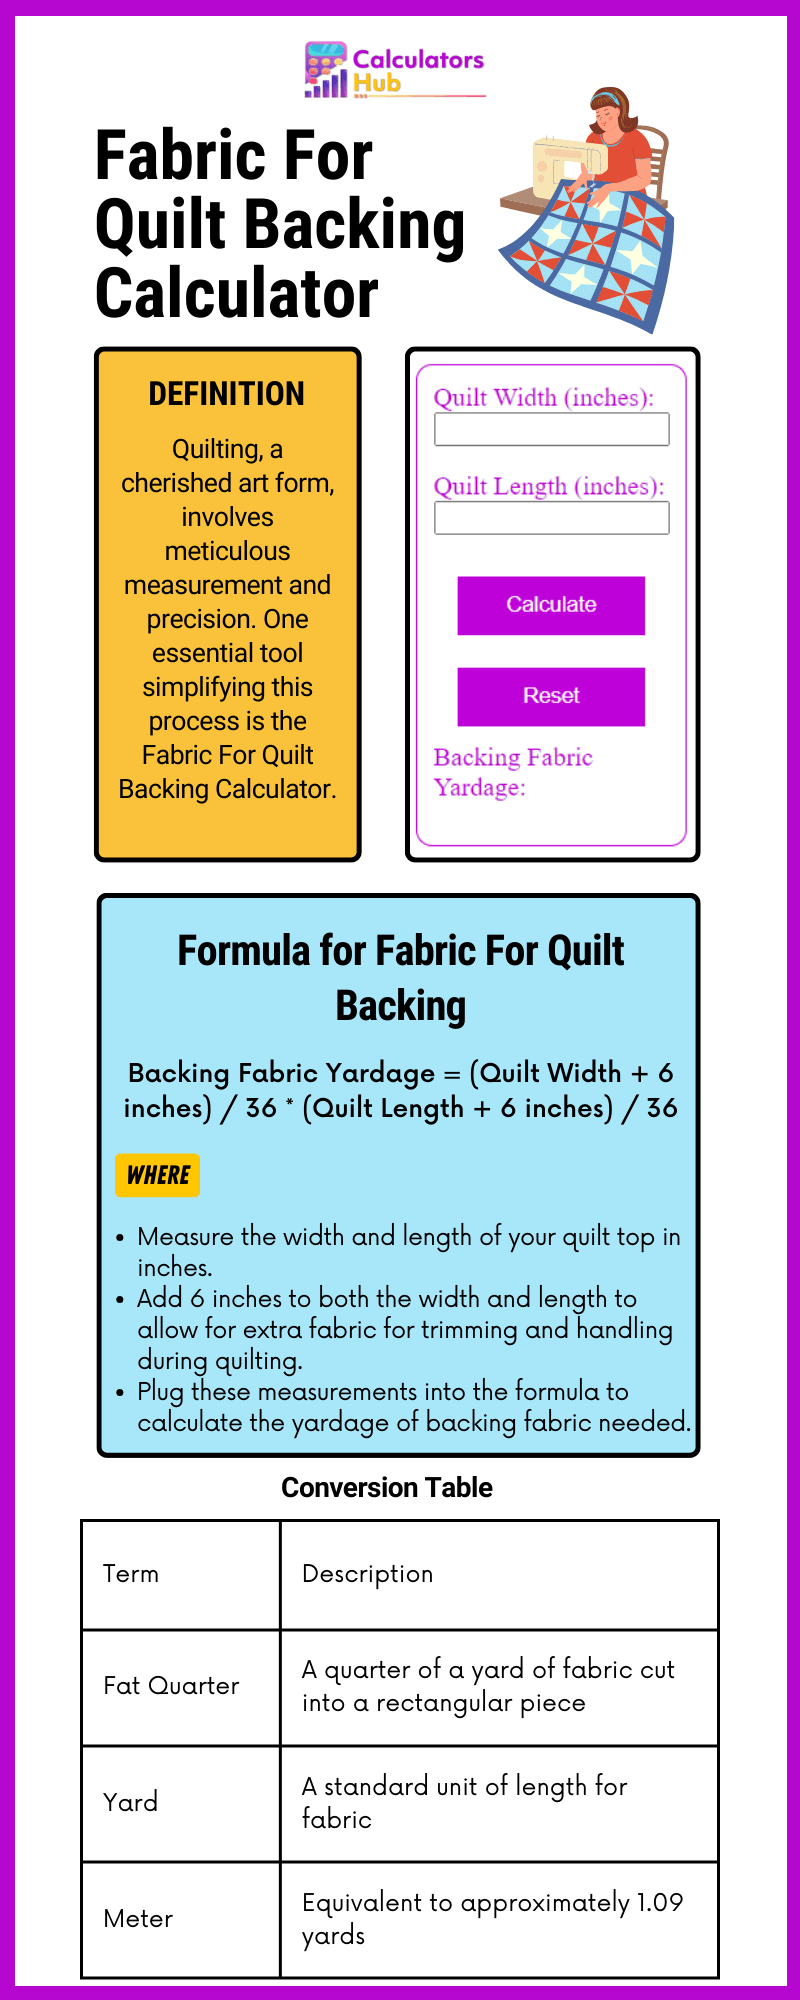 Fabric For Quilt Backing Calculator